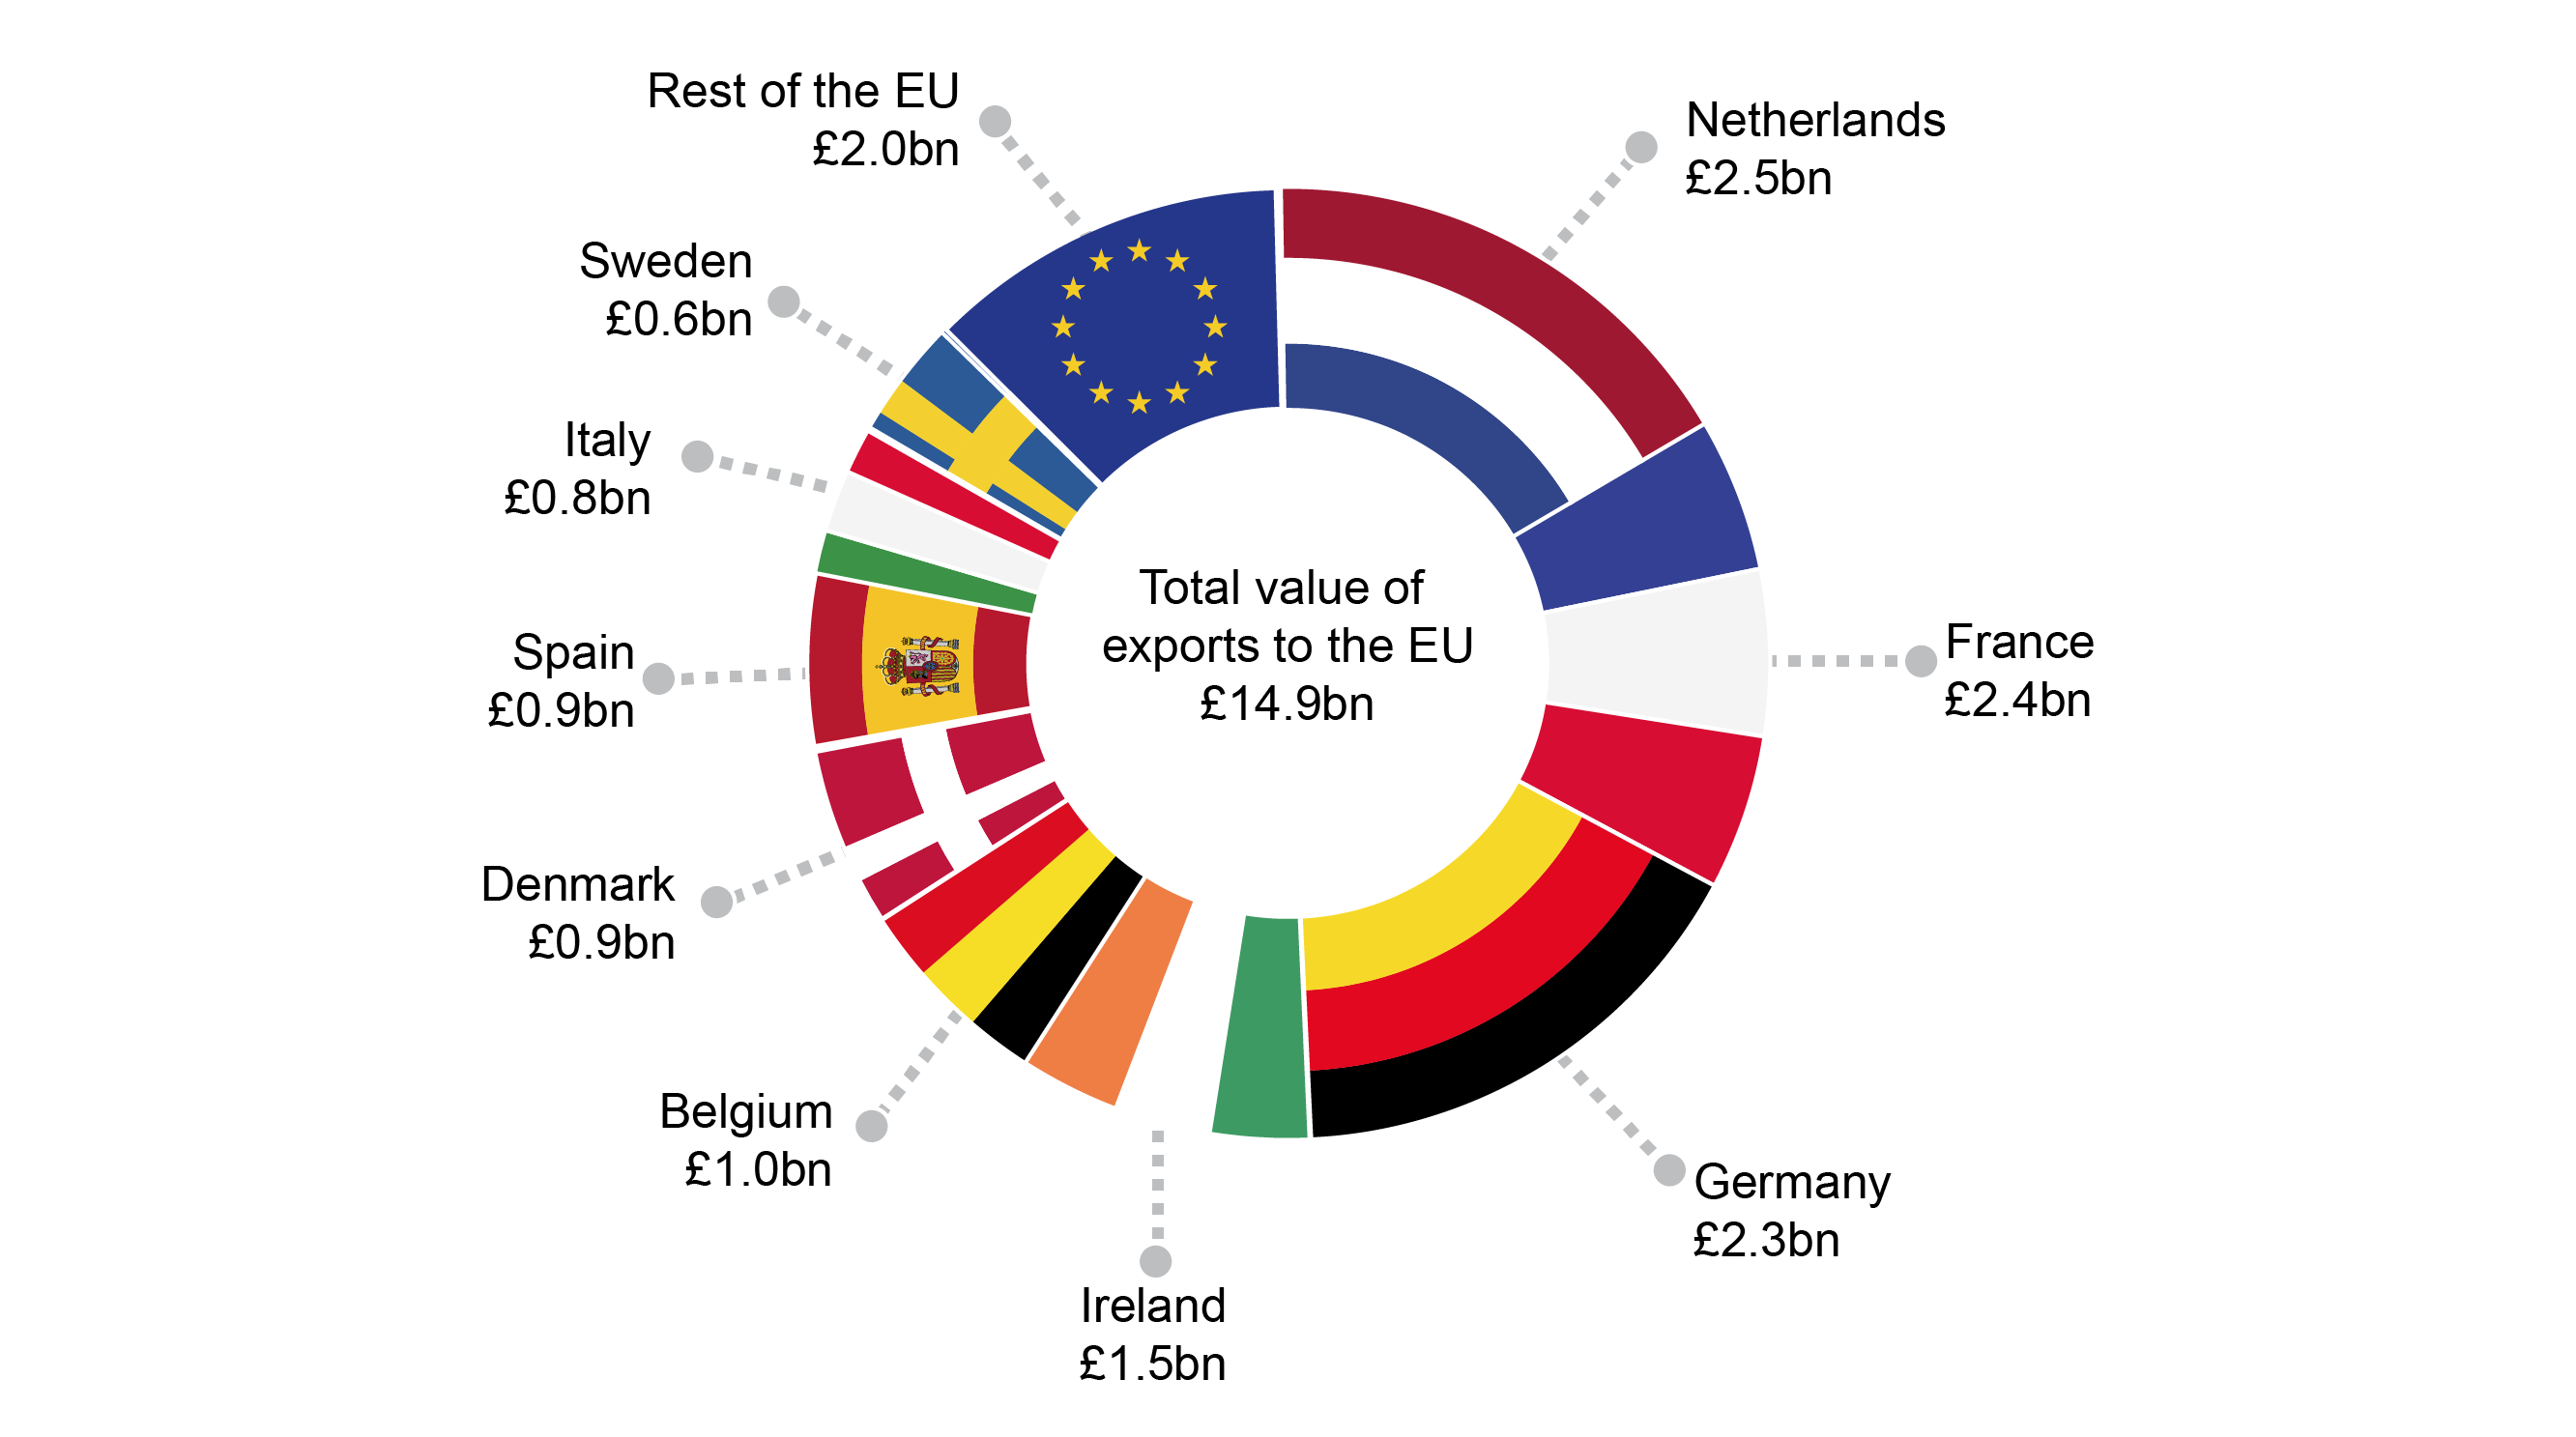 The value of exports to countries in the European Union in 2017.